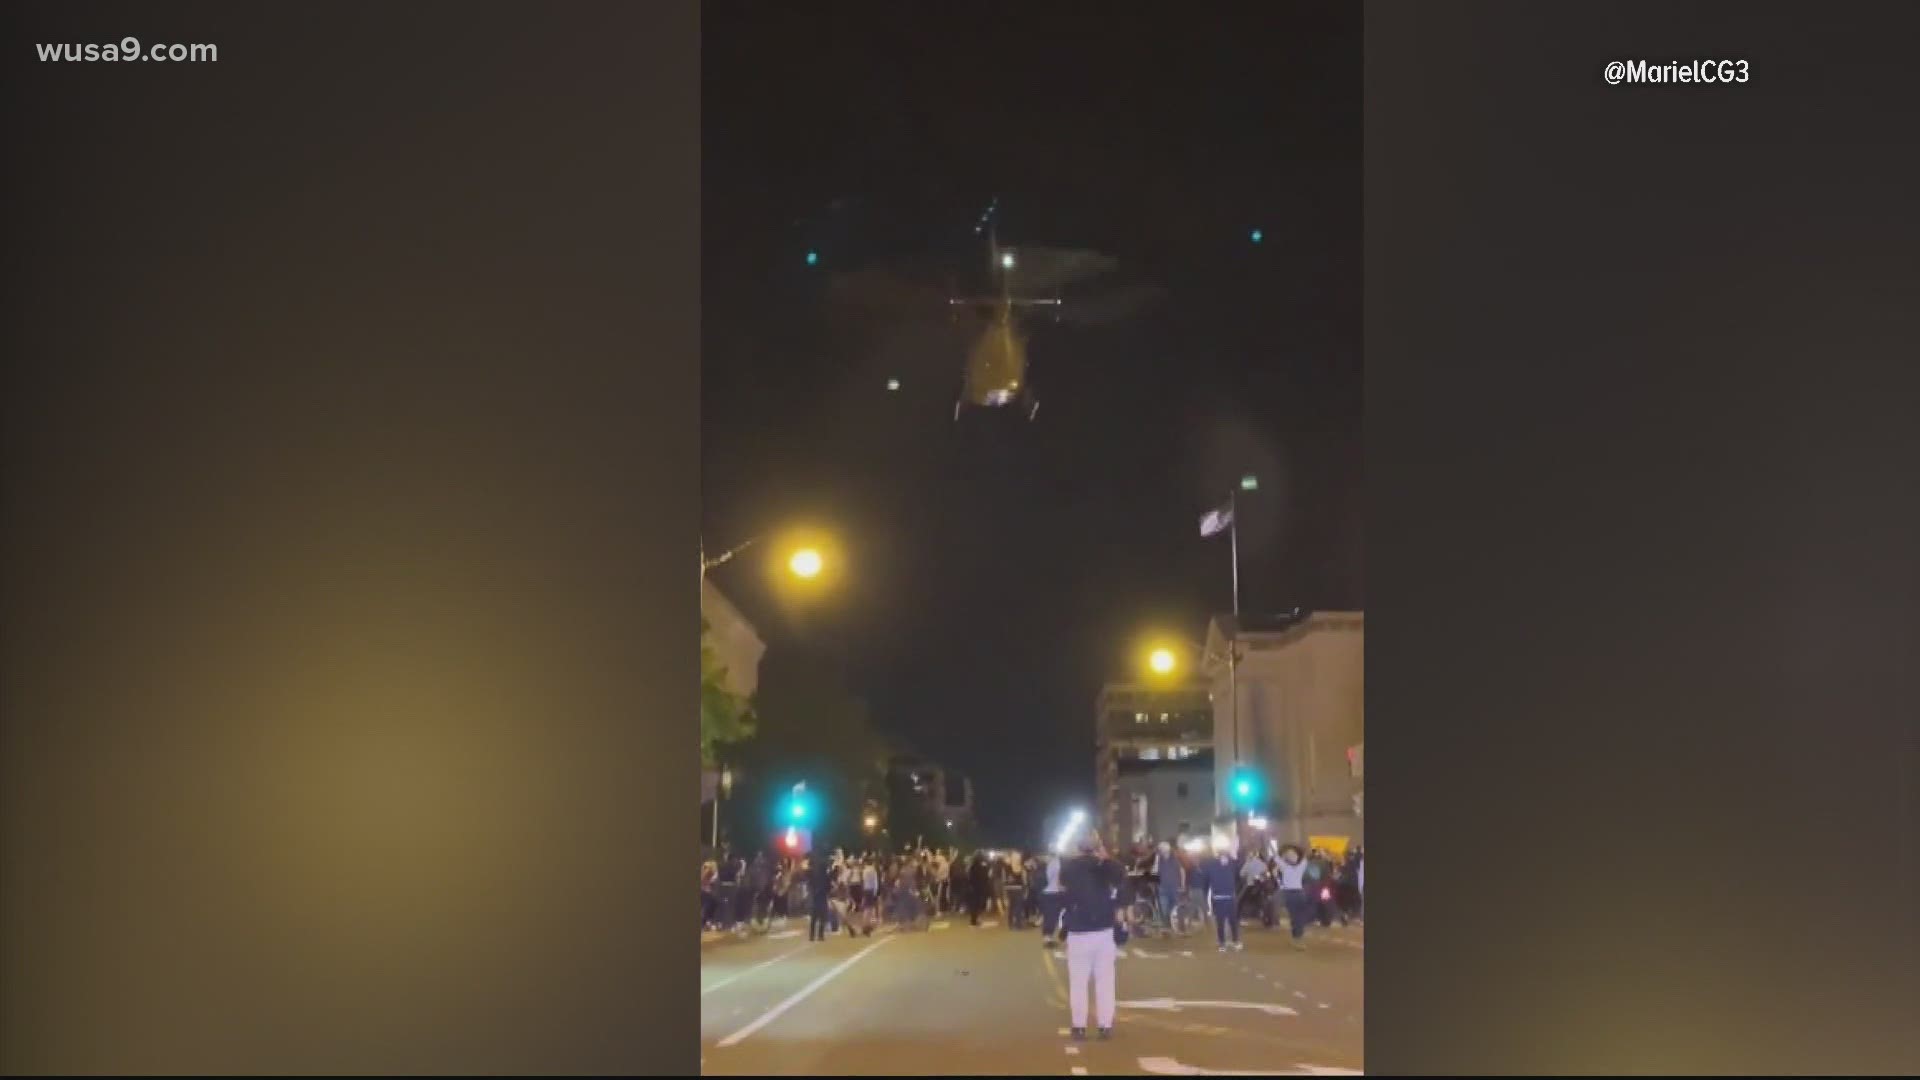 The ACLU is filing a complaint against the DC National Guard. It claims the Guard used helicopters, military-style intimidation tactics, against protesters